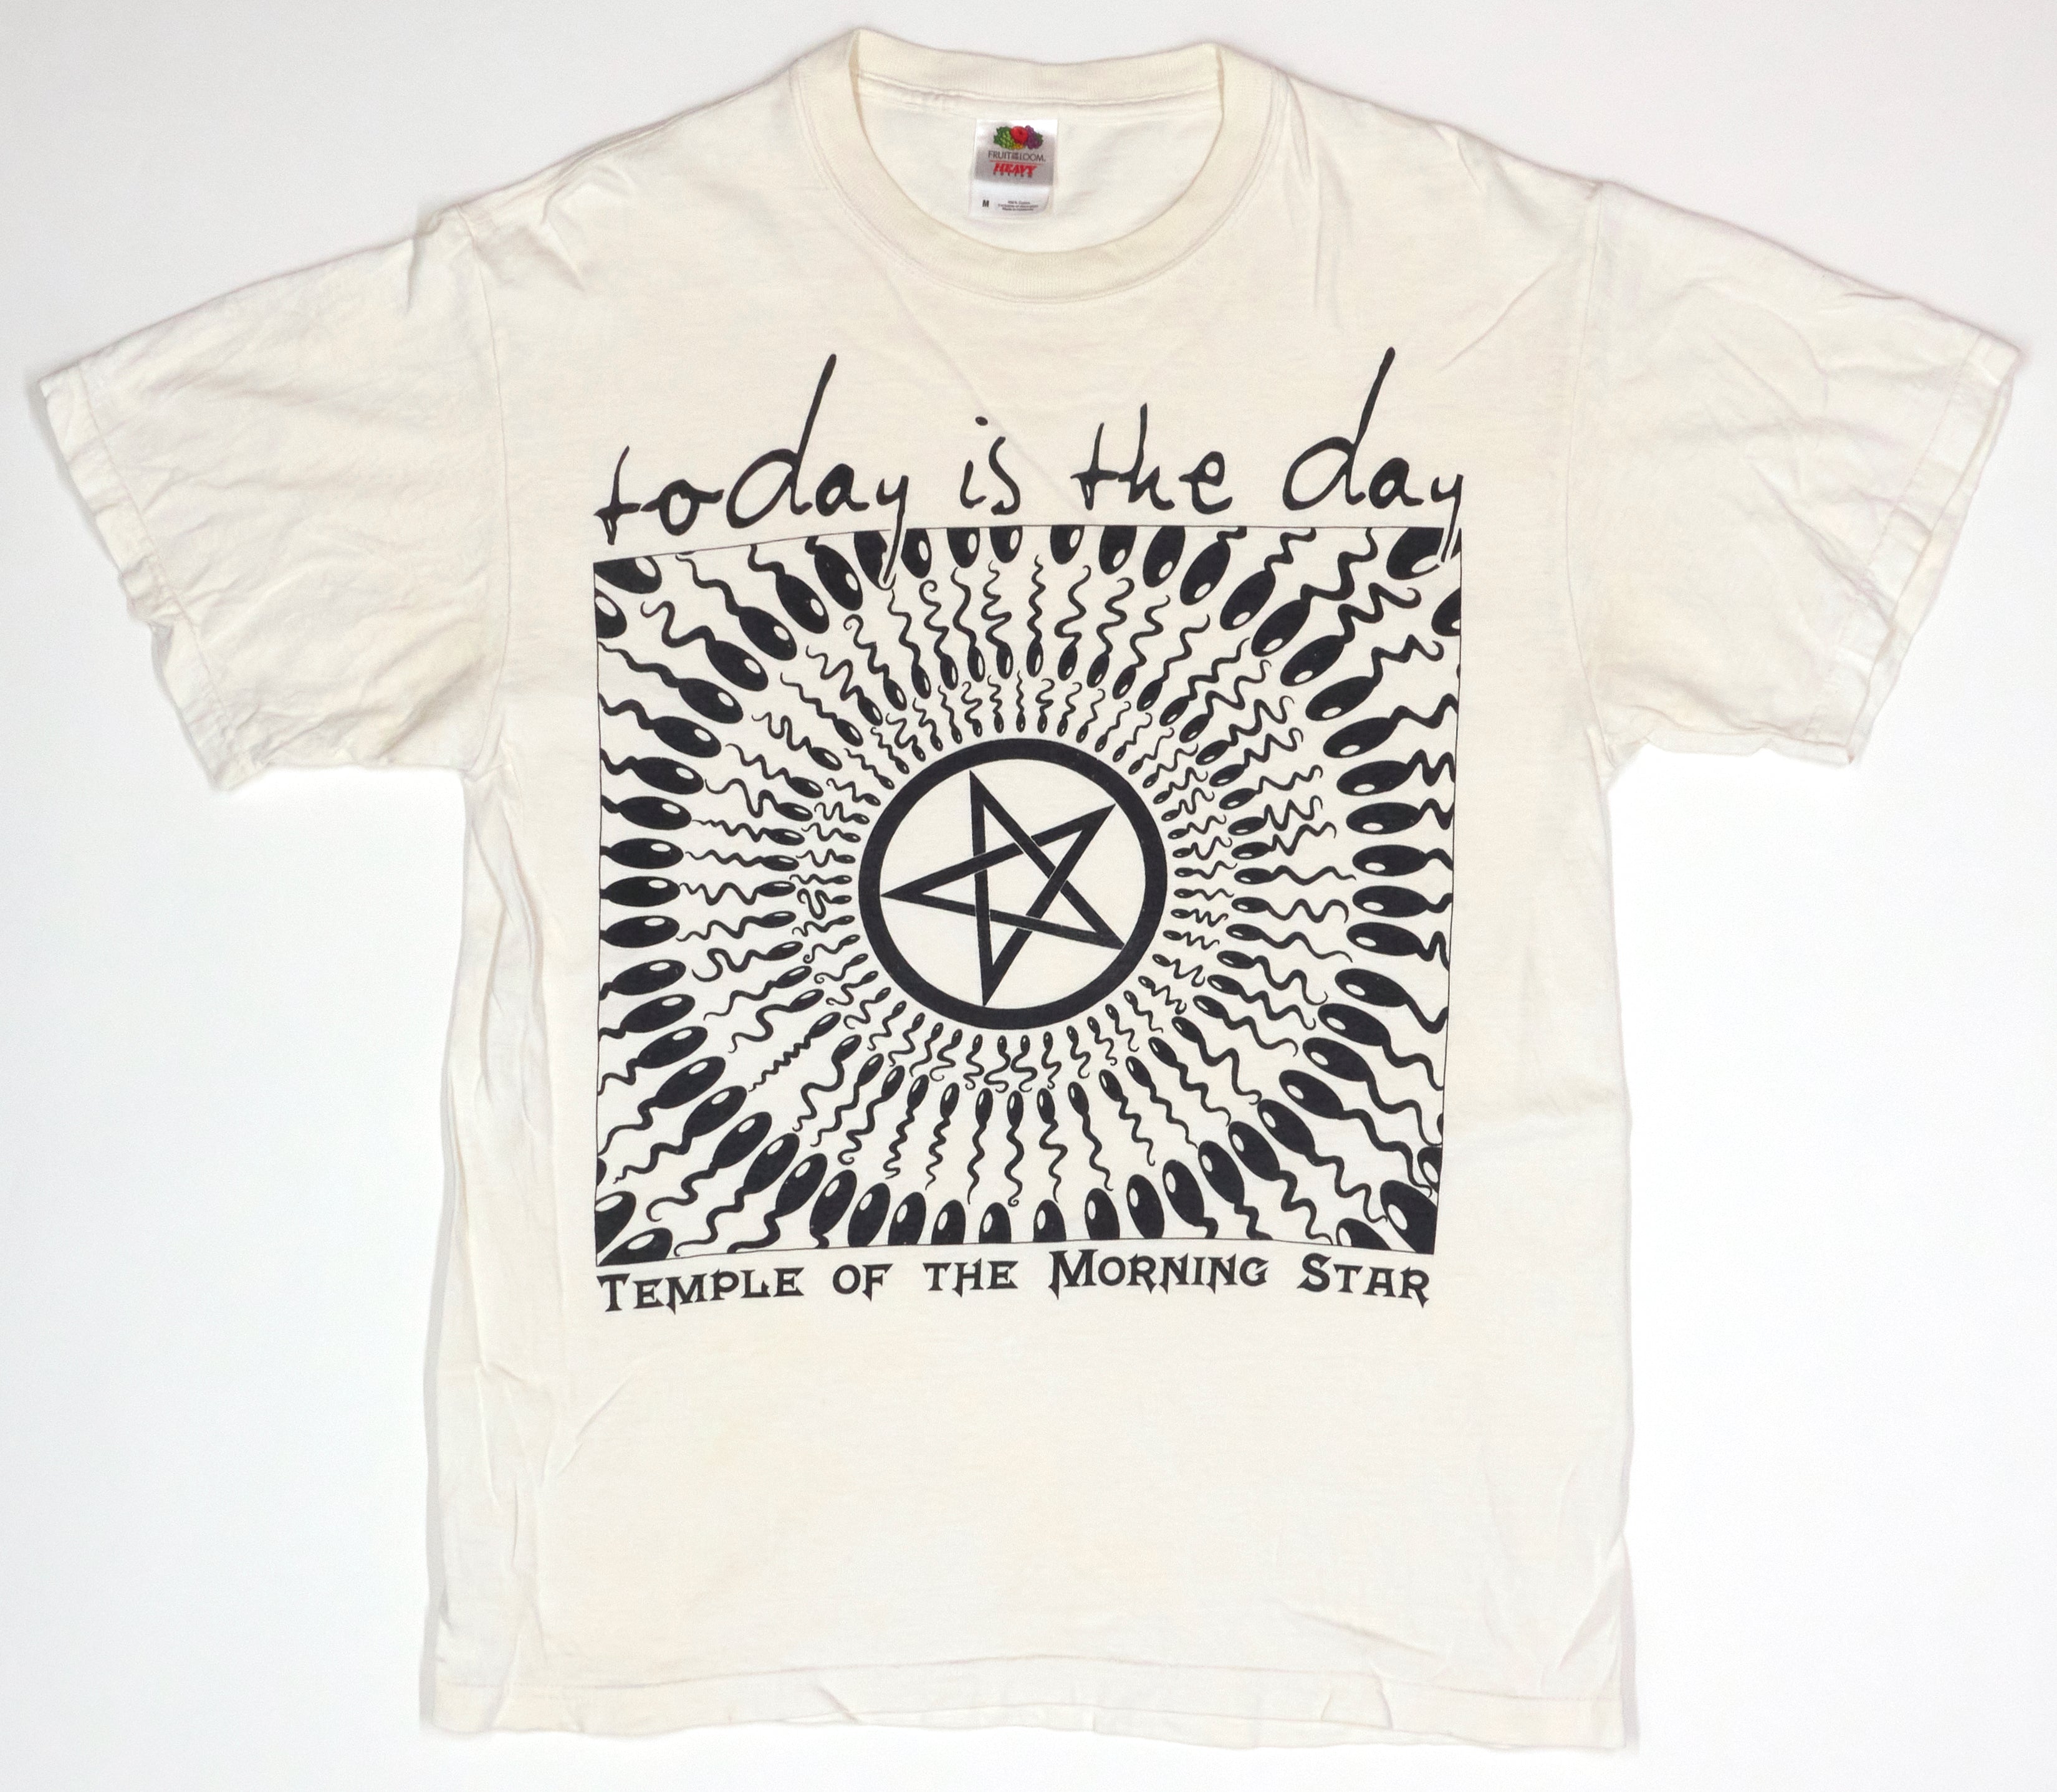 Today Is The Day – Temple Of The Morning Star Tour Shirt Size Medium